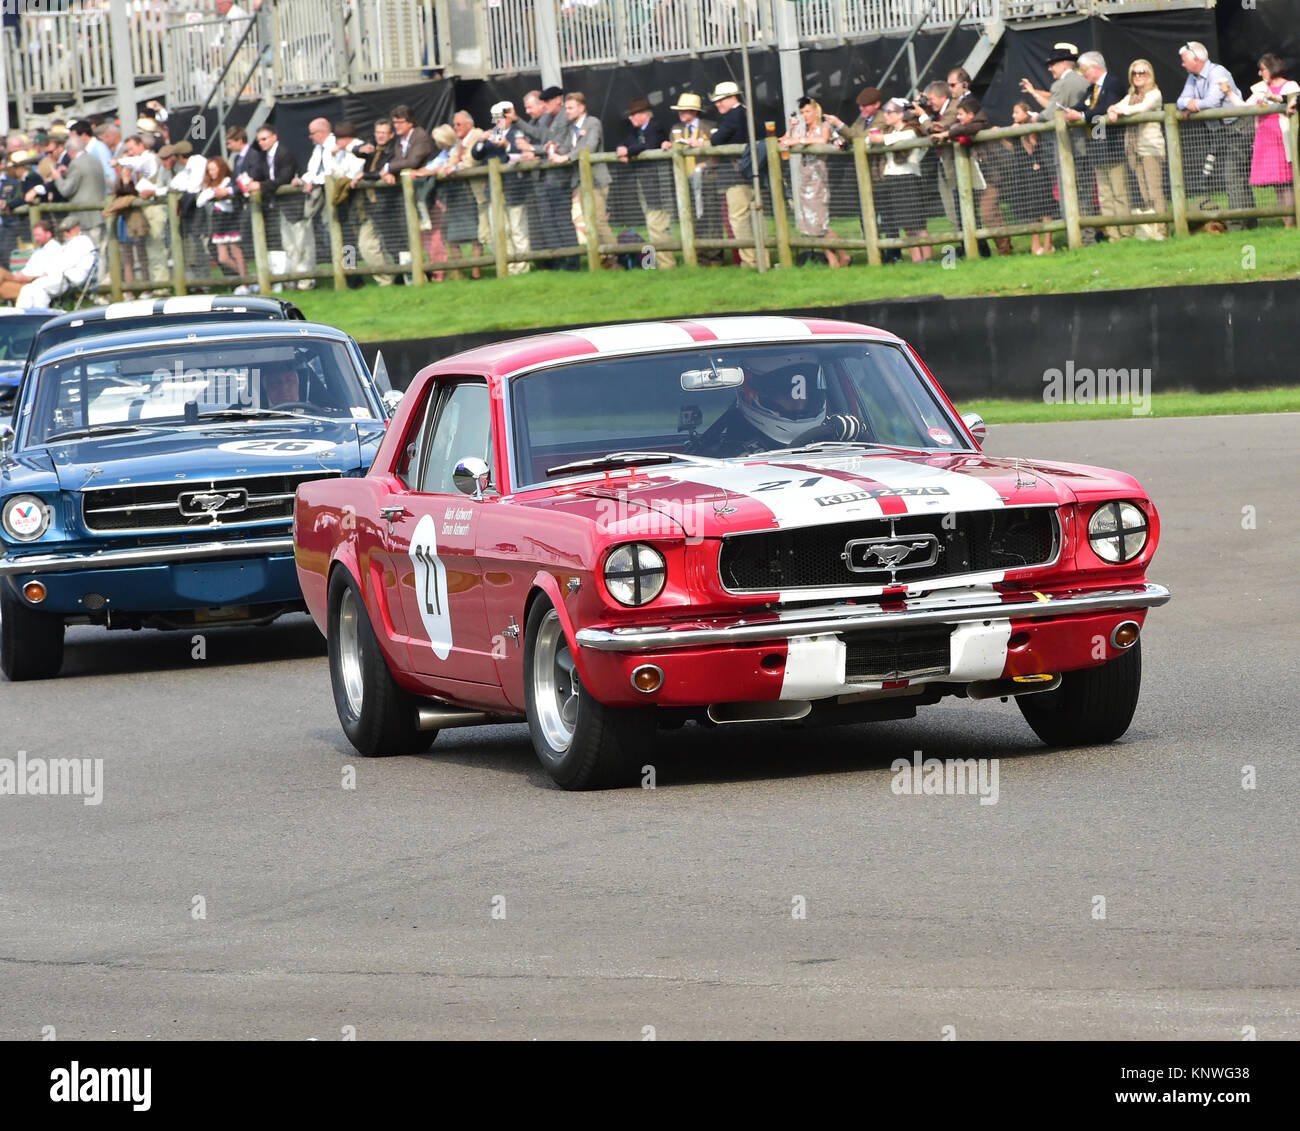 C V8 Stock Photos & C V8 Stock Images - Page 2 - Alamy